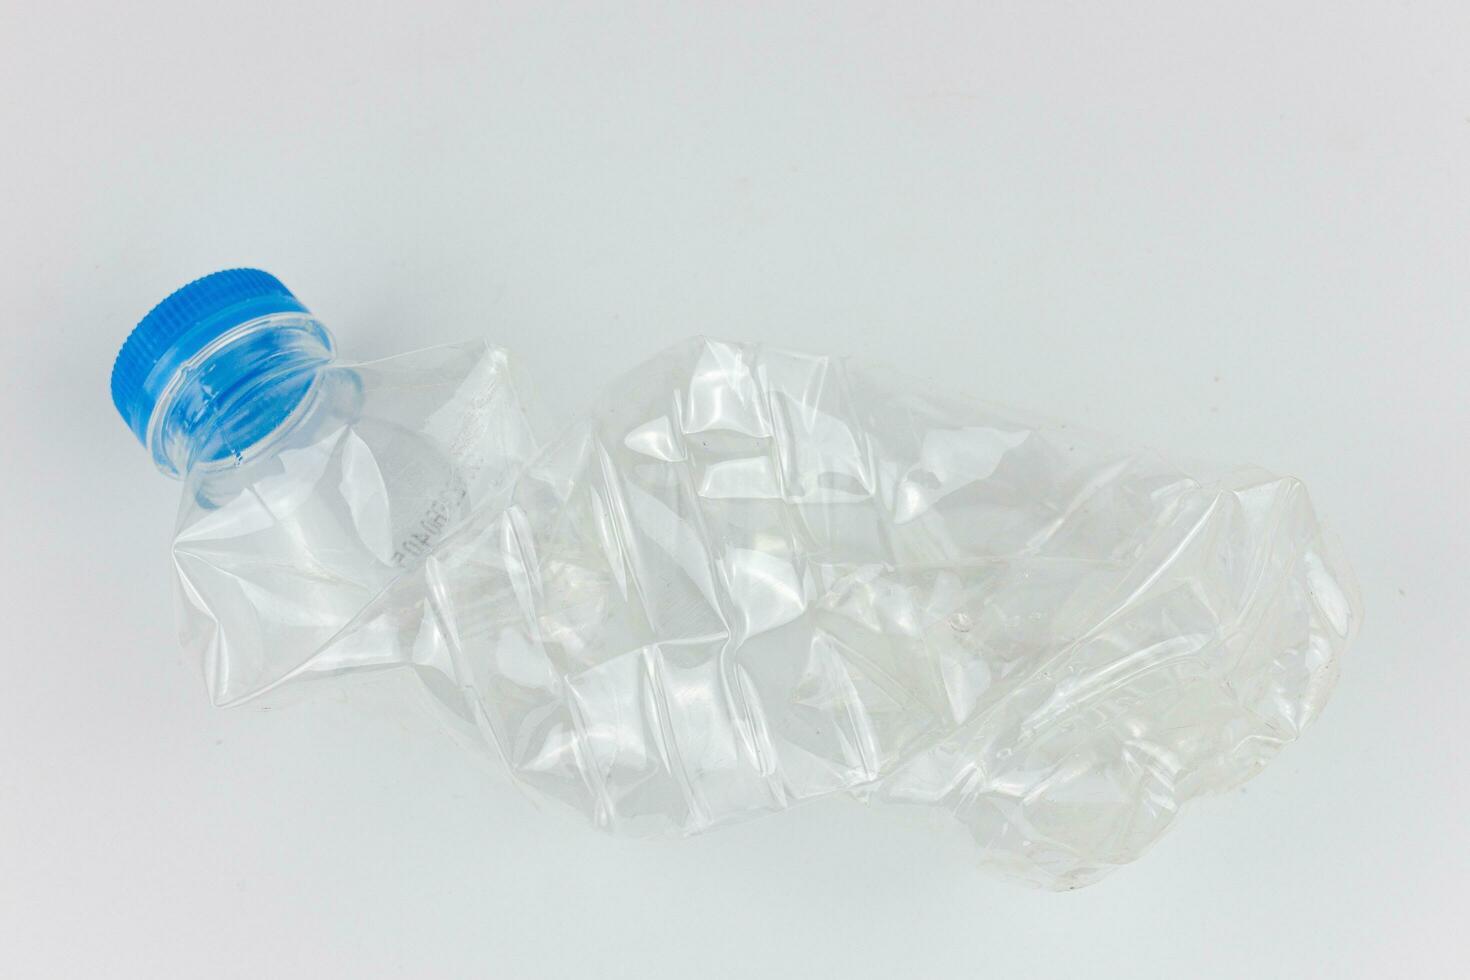 Plastic bottle isolated on white background. Plastic waste and environmental pollution concept. photo